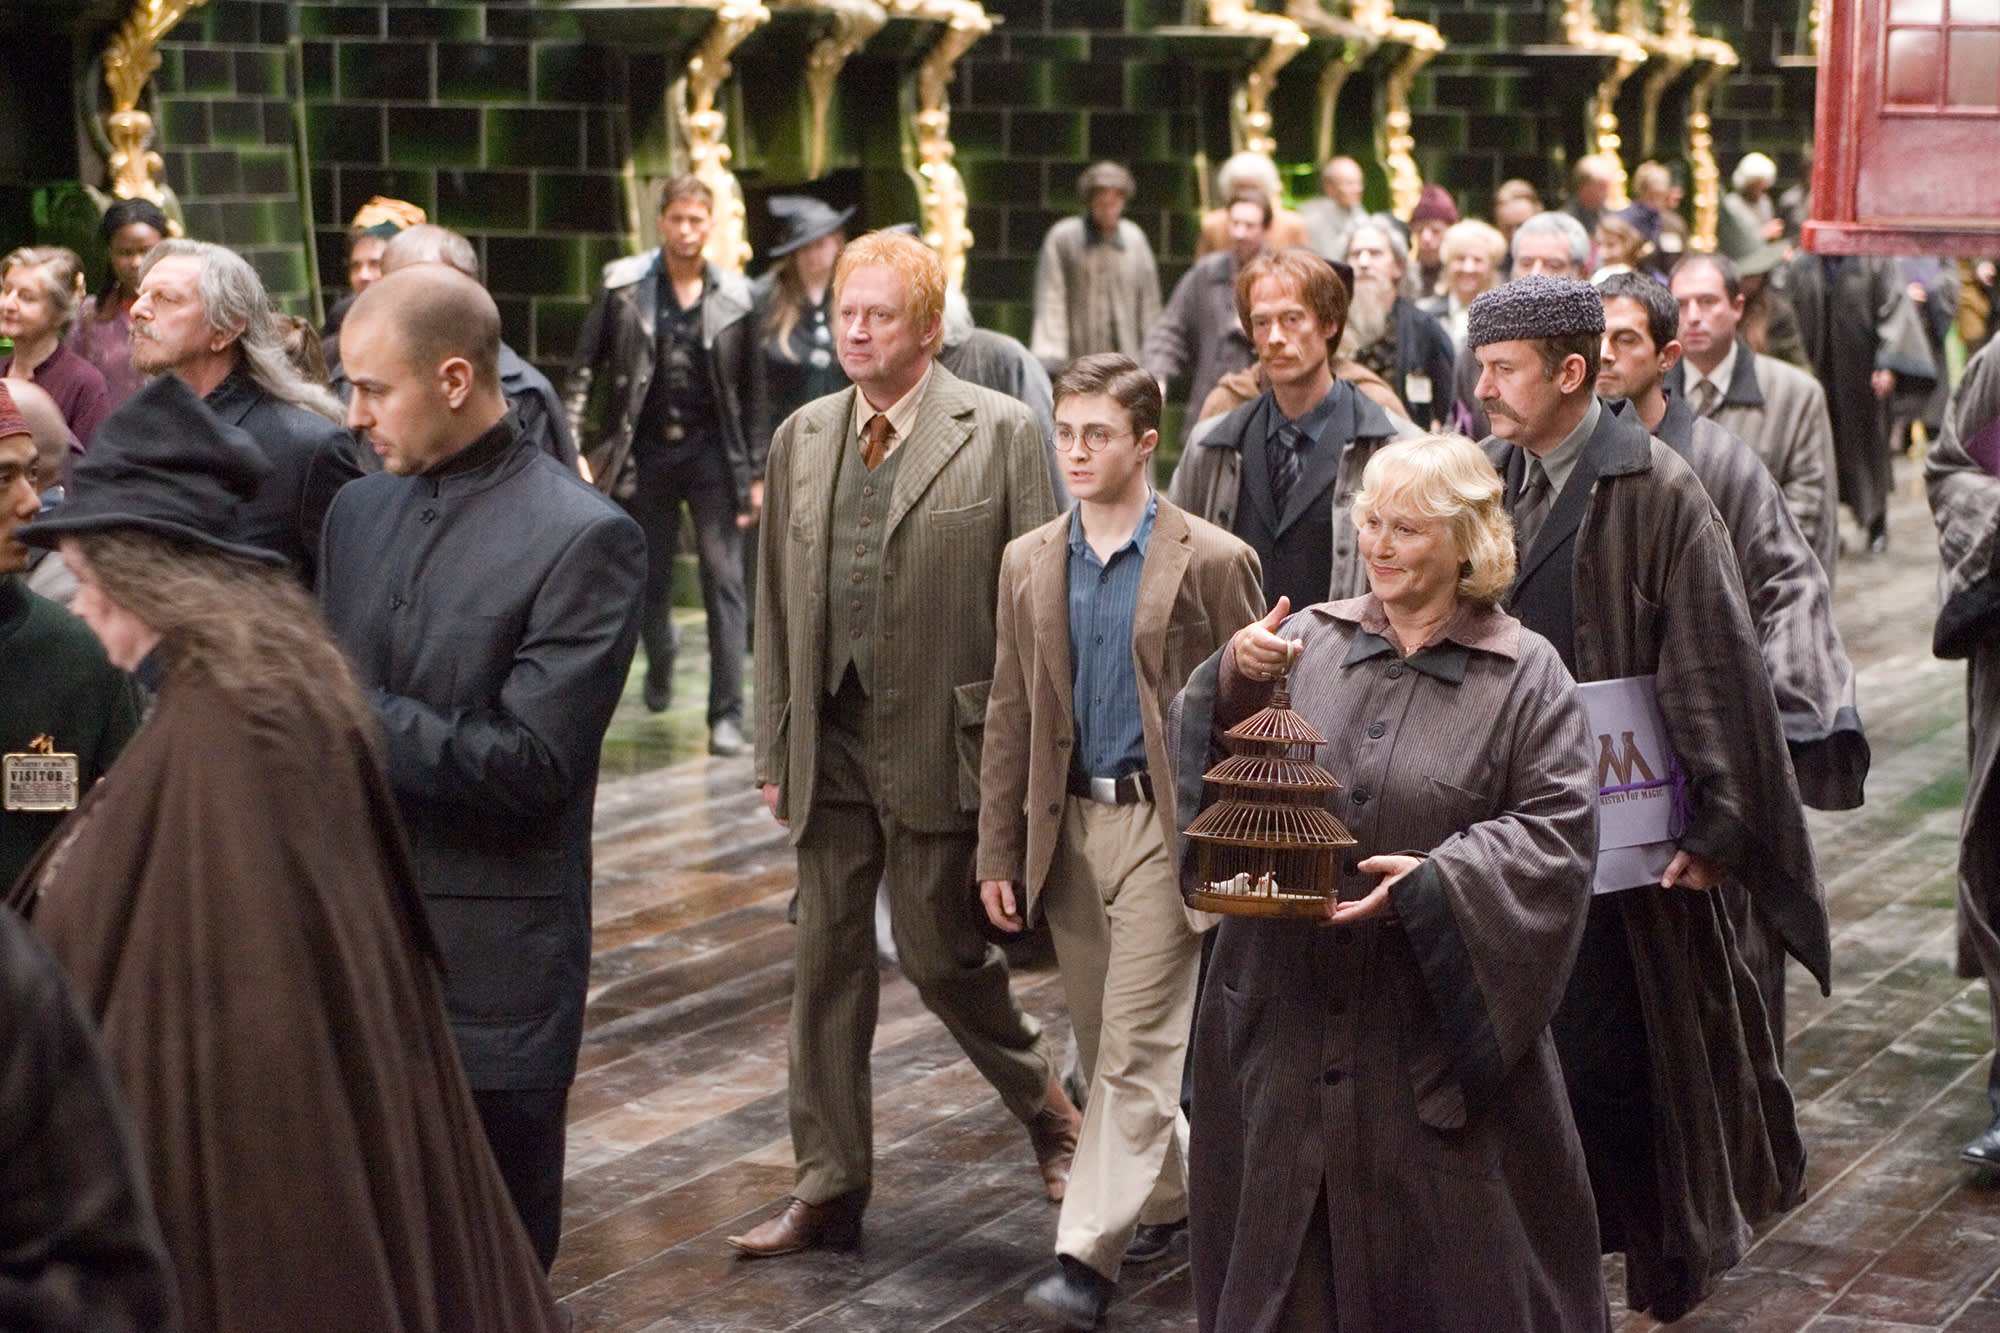 Harry Potter and Arthur Weasley are walking through the crowded atrium at the Ministry of Magic